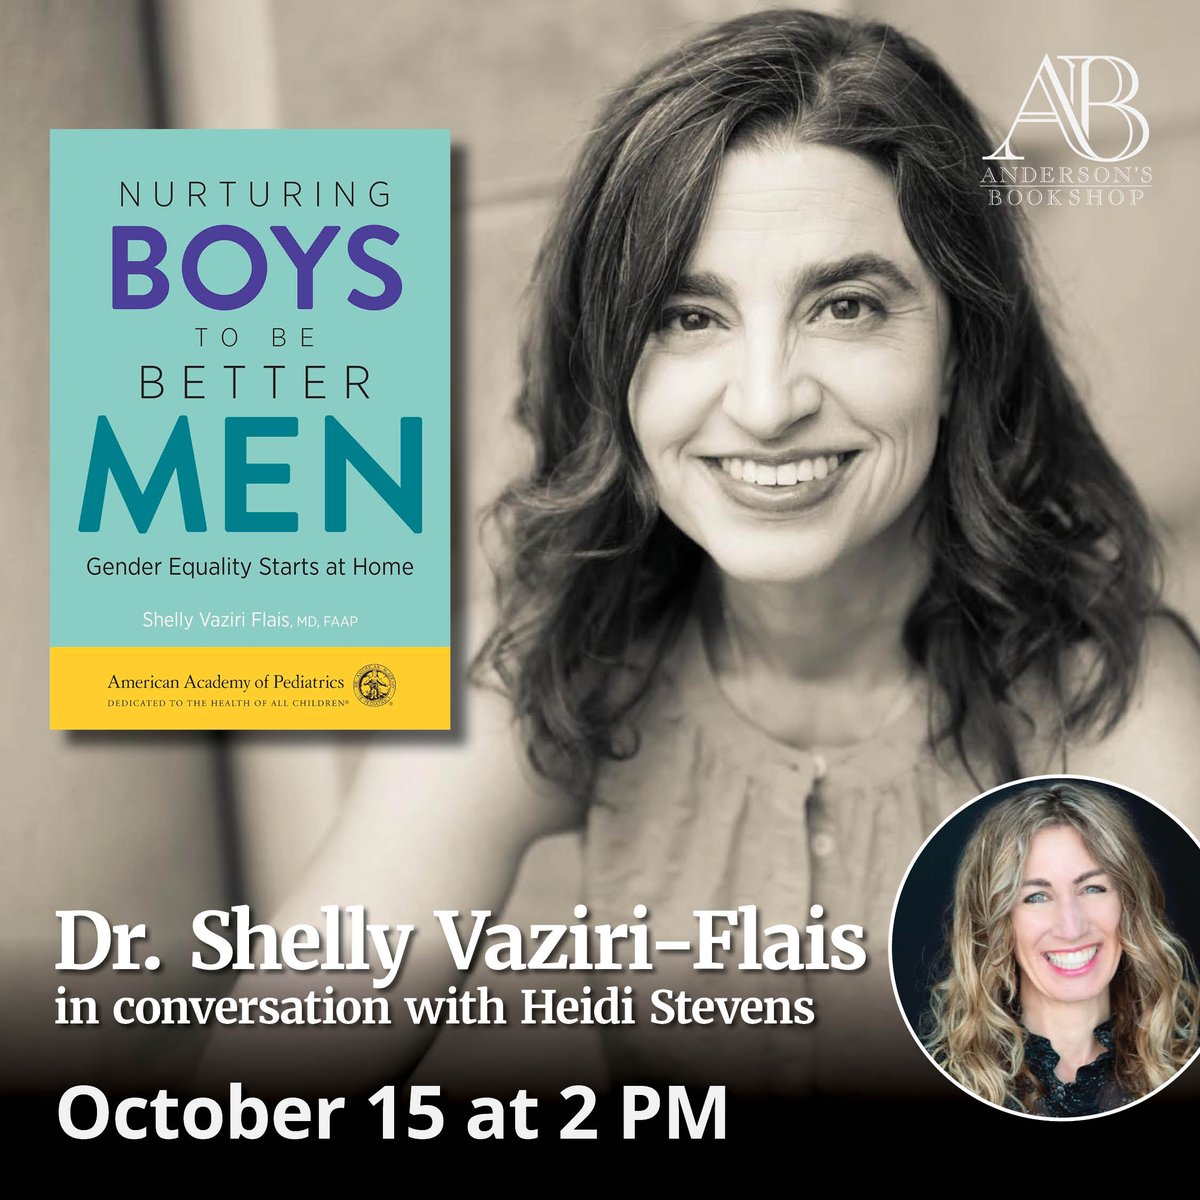 10/15: Local Author Showcase w/ @shellyflaismd Dr. Shelly Vaziri-Flais (Nurturing Boys to be Better Men: Gender Equality Begins at Home) at 2pm in Naperville. In convo w/ Heidi Stevens. Includes audience Q&A, and a signing/photo line. TICKETS: …lyVaziriFlaisAndersons.eventcombo.com